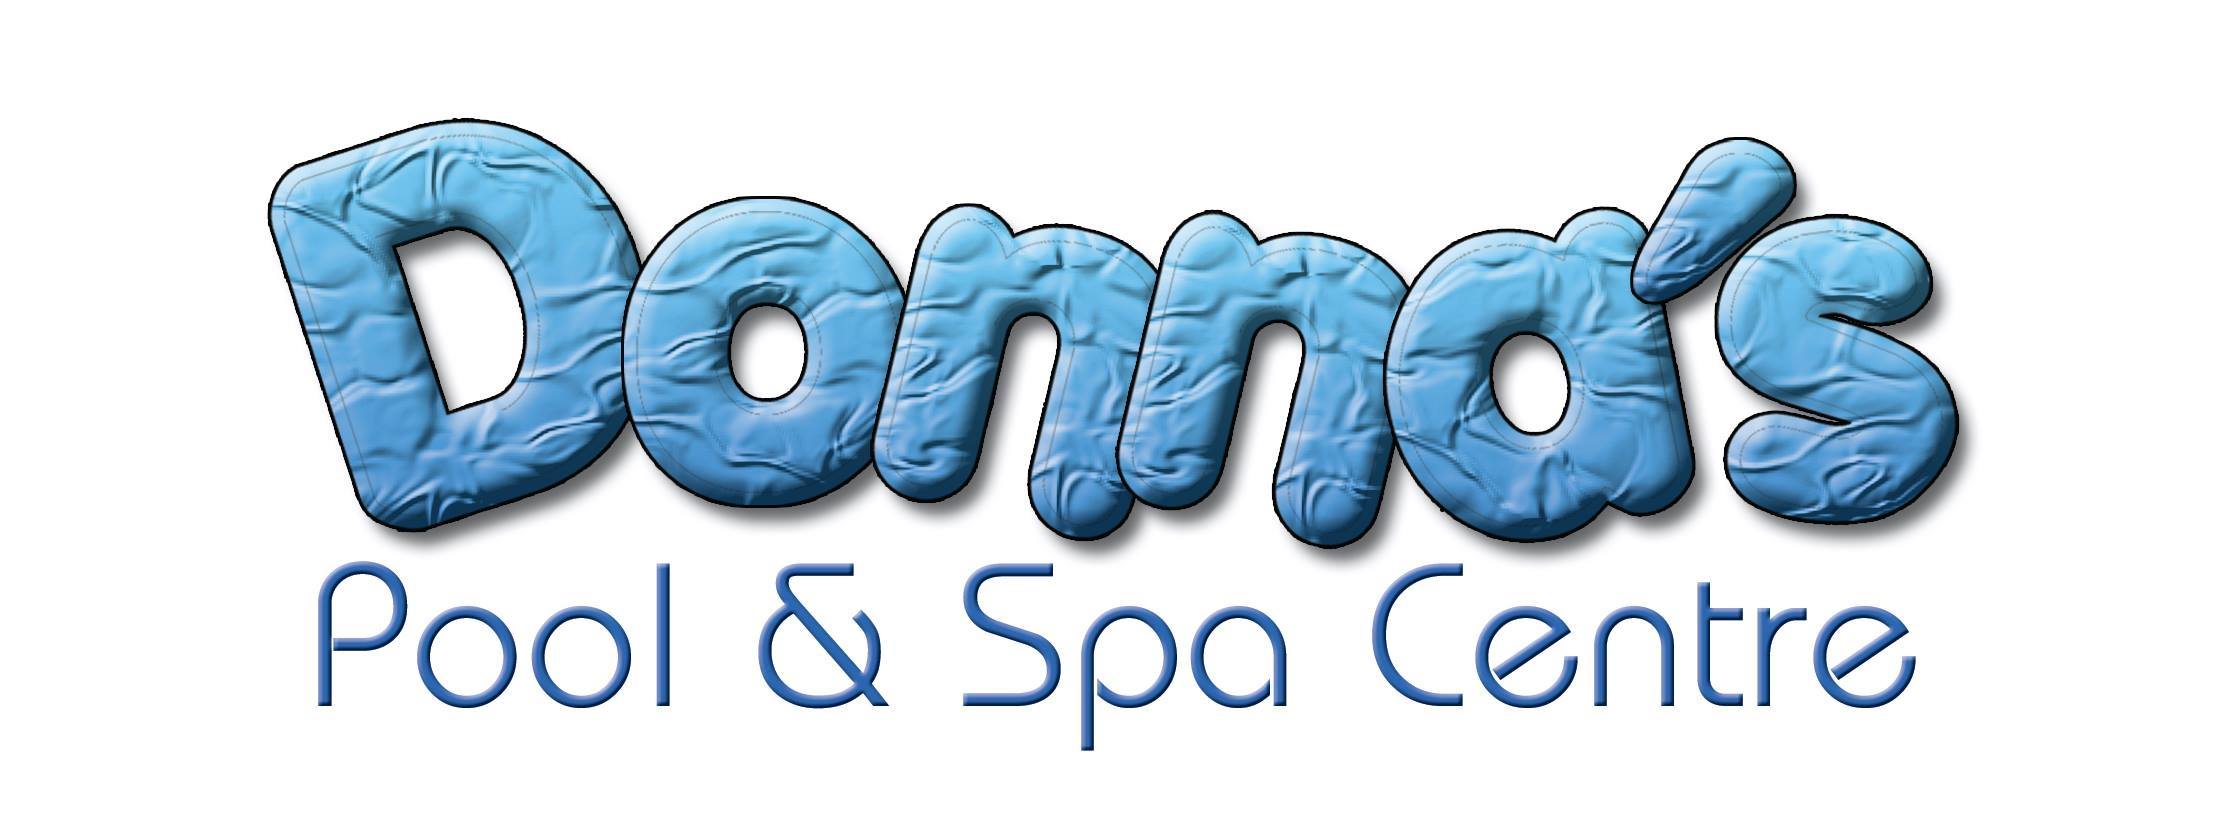 Donna's Pool & Spa Centre - Banner